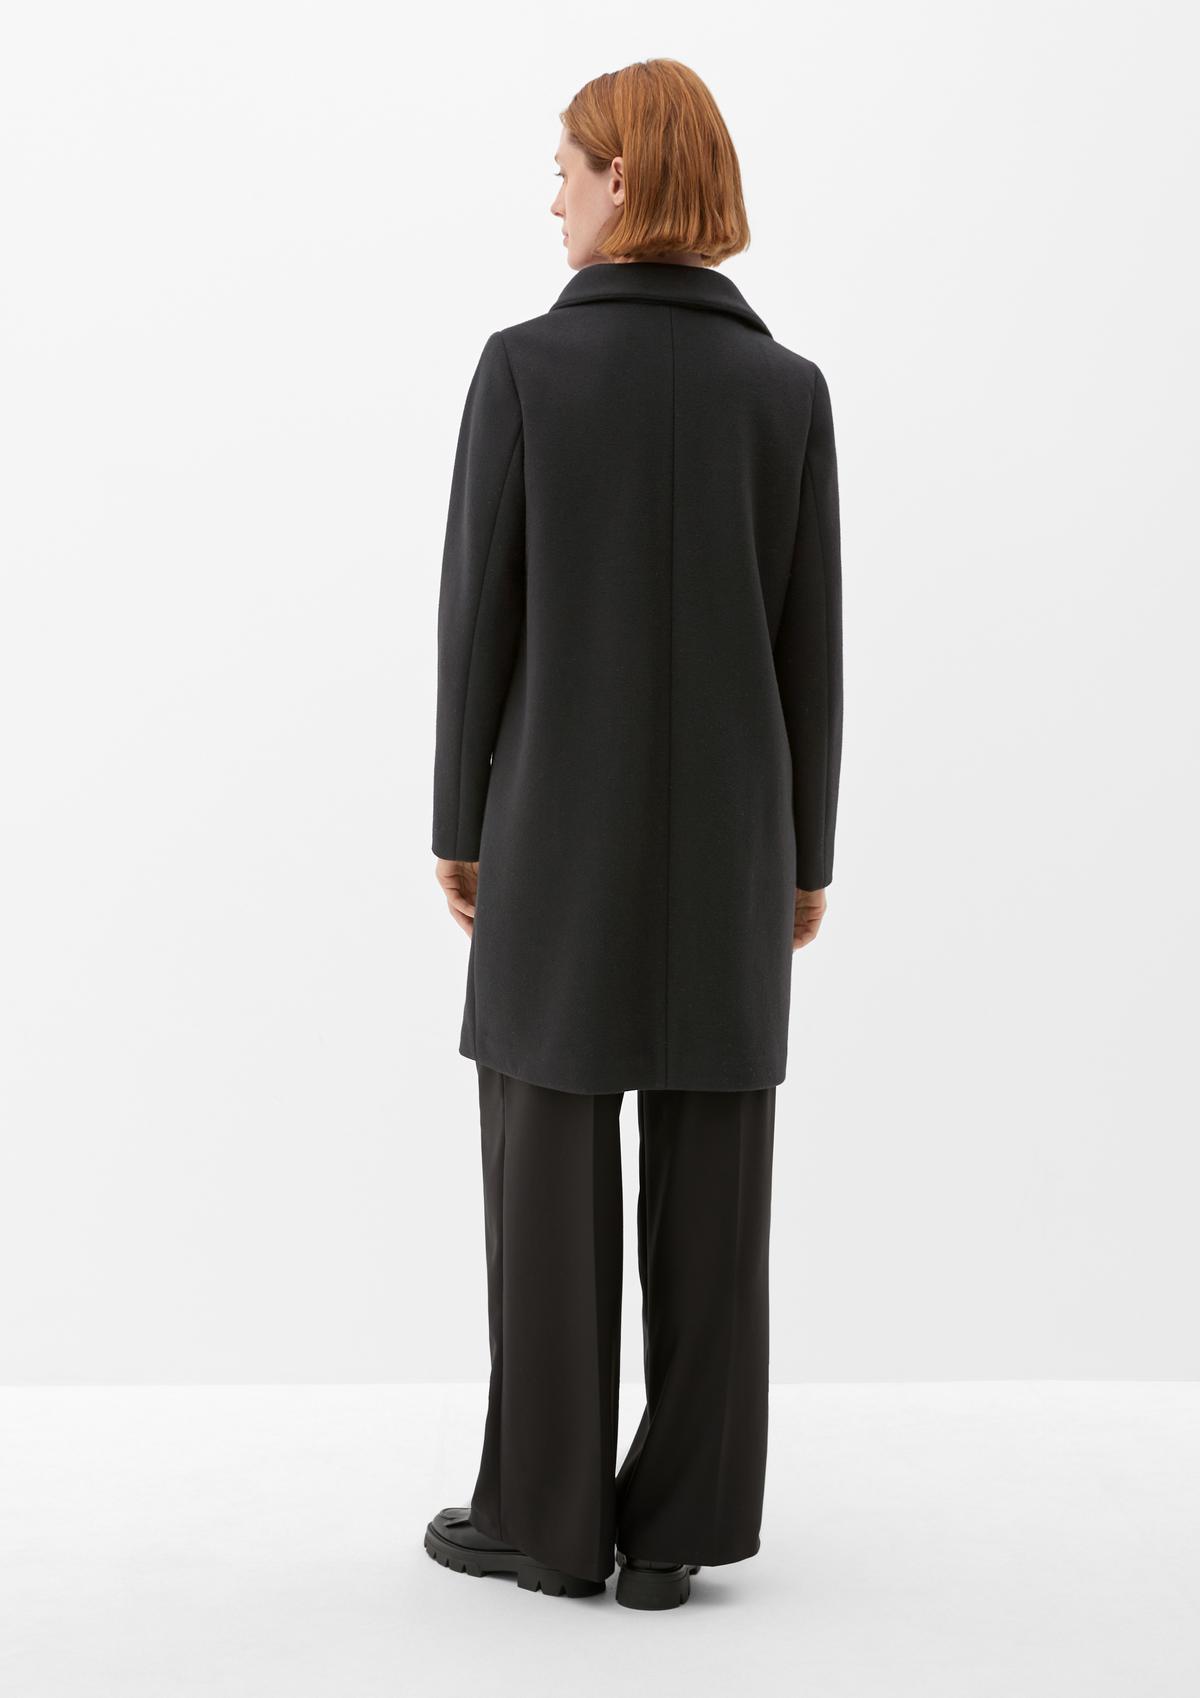 s.Oliver Blended wool coat with a stand-up collar